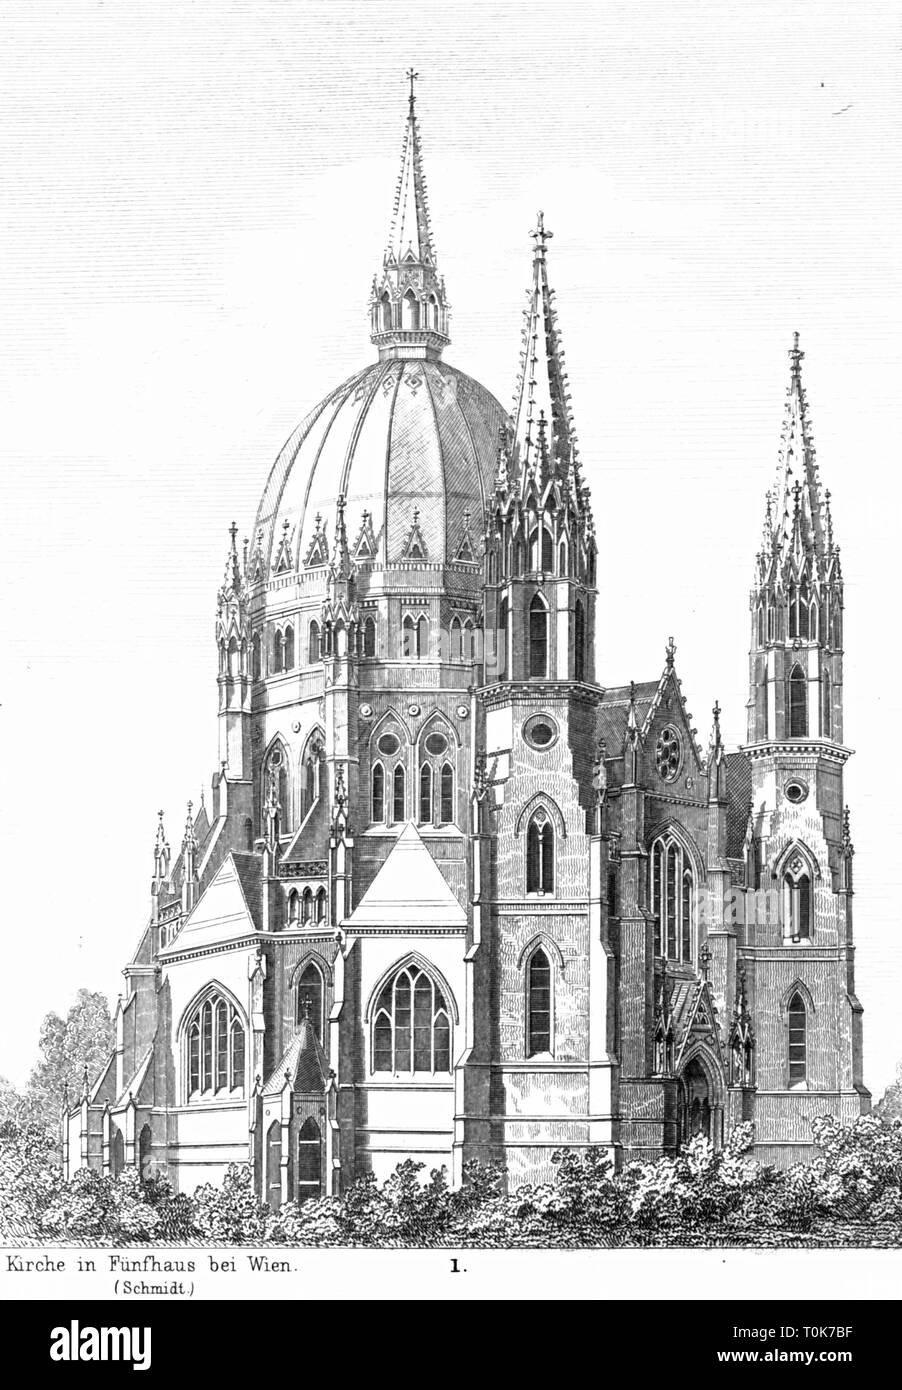 geography / travel, Austria, Vienna, churches, Church Maria vom Siege, built 1868 - 1875, architect: Friedrich von Schmidt, exterior view, illustration from 'Denkmaeler der Kunst' (Monuments of Art), by Wilhelm Luebke and Carl von Luetzow, 3rd edition, Stuttgart 1879, volume 2, chapter on architecture, plate LIX, steel engraving, Central Europe, 19th century, building, buildings, religious, sacred, historic, historical, Denkmaler, Denkmäler, Lübke, Lubke, Lützow, Lutzow, Additional-Rights-Clearance-Info-Not-Available Stock Photo